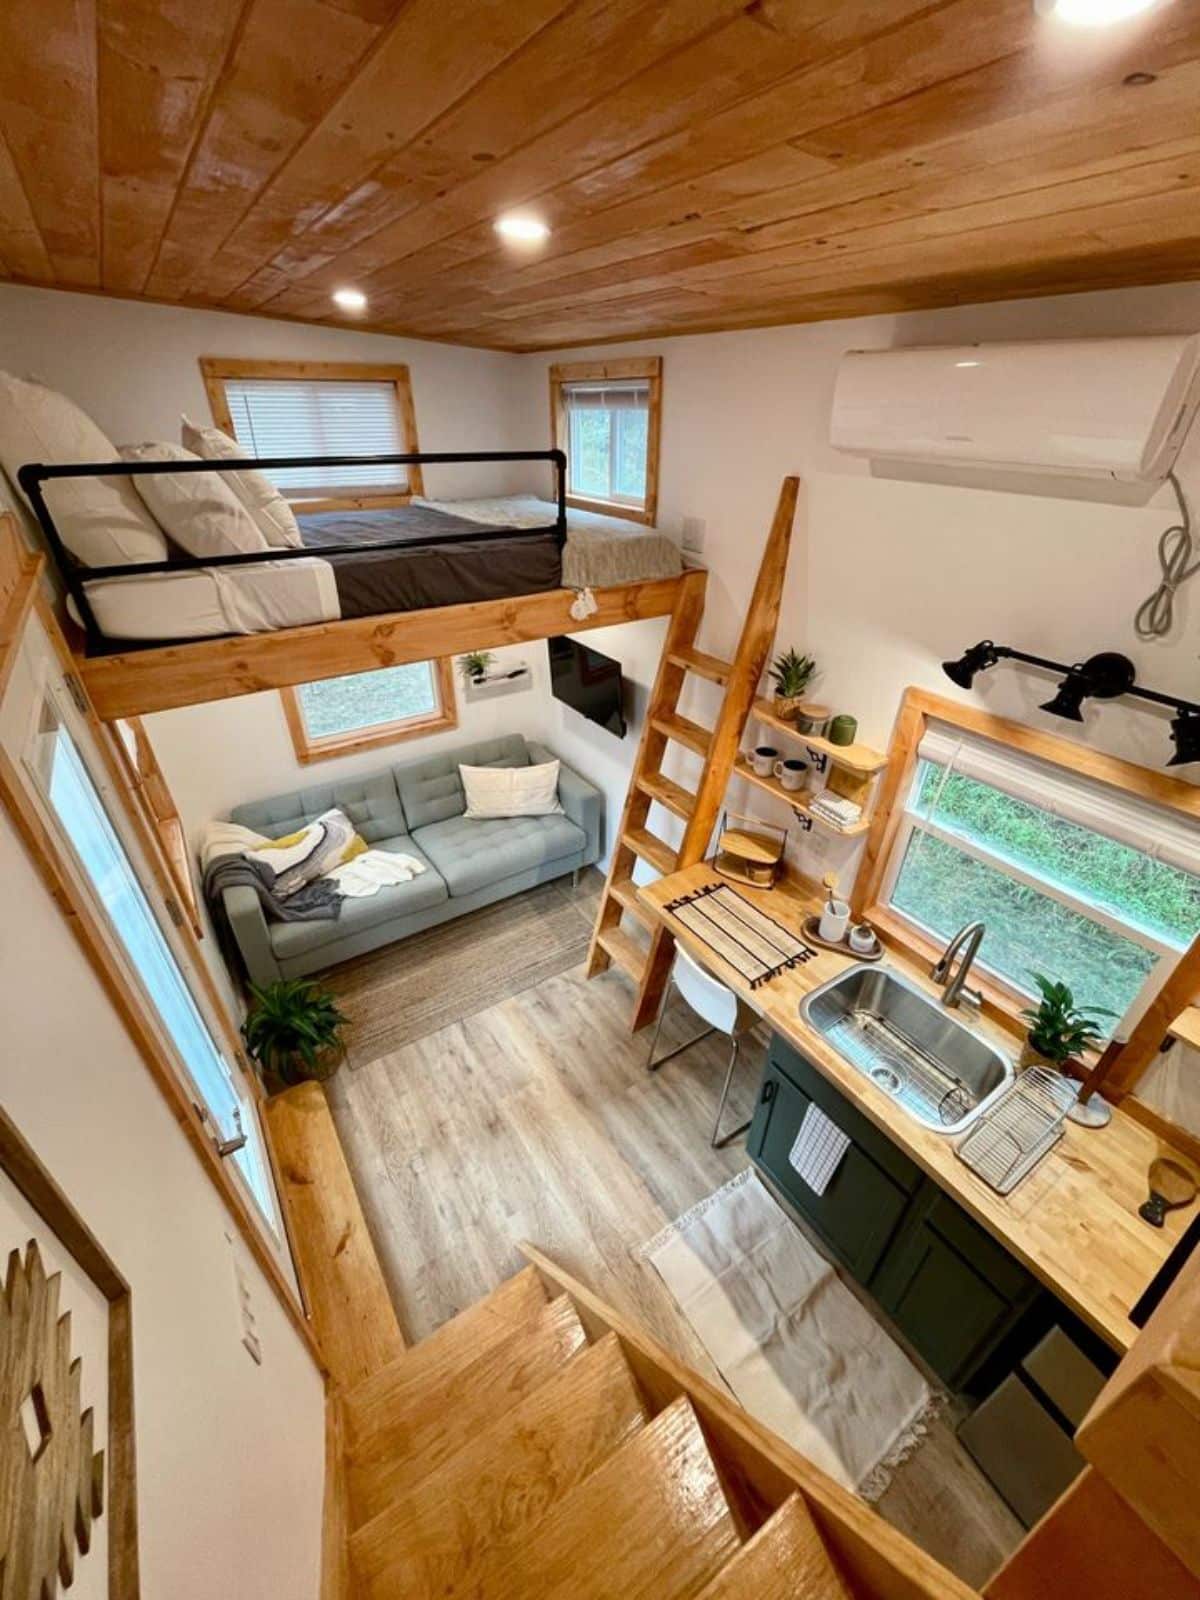 areal view of brand new tiny house from inside